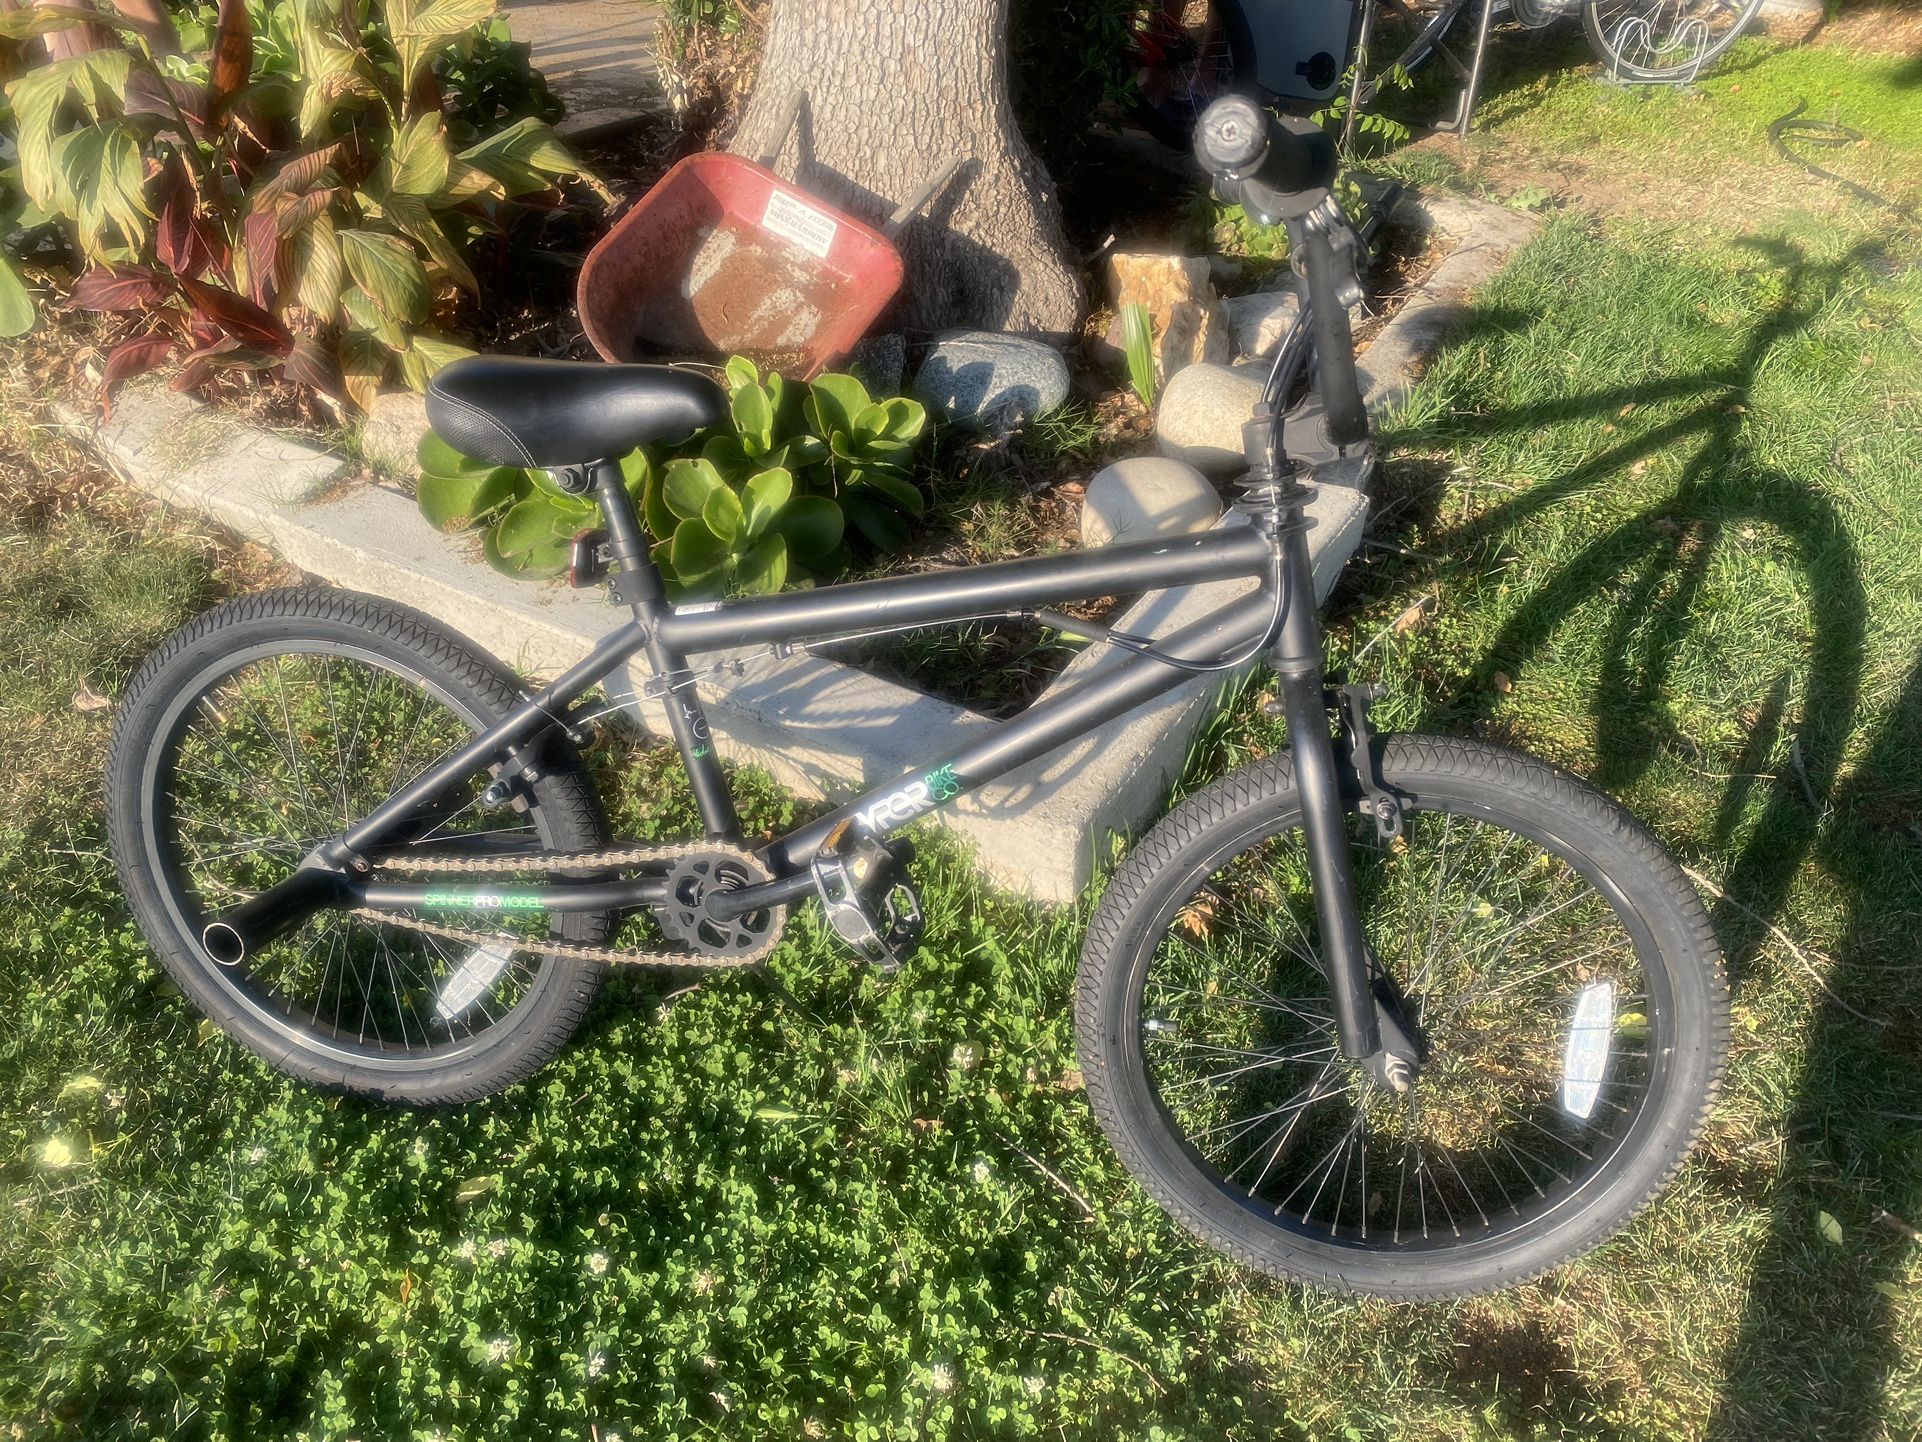 20” Hyper Bmx Bike In Real Good Shape Small With Small Sprockets